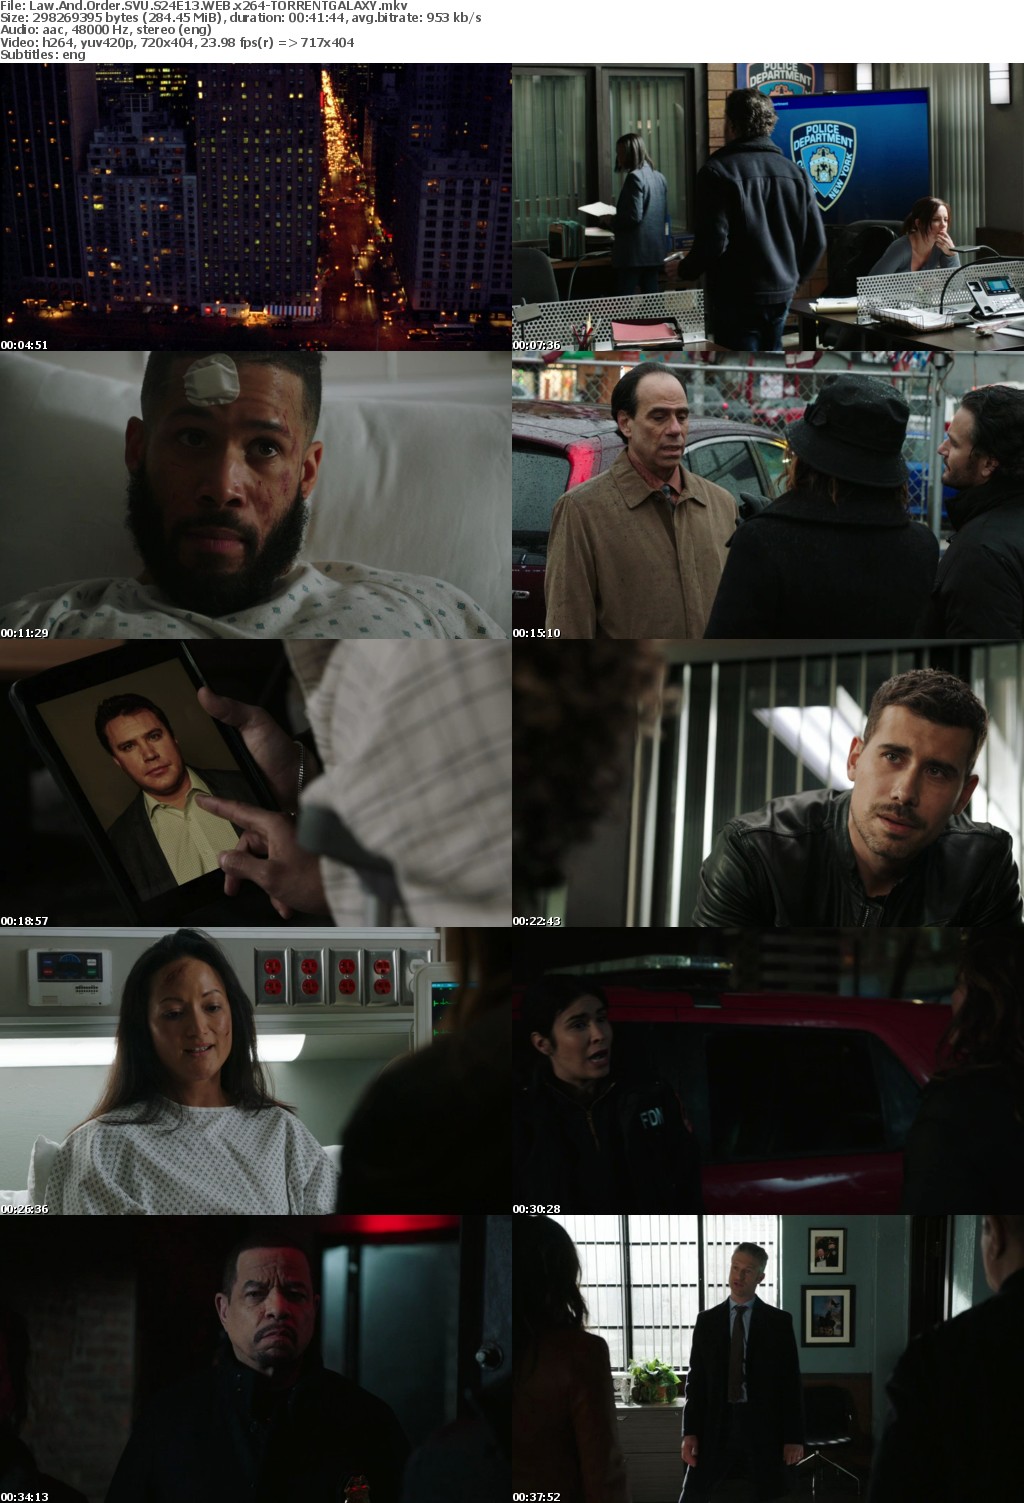 Law And Order SVU S24E13 WEB x264-GALAXY